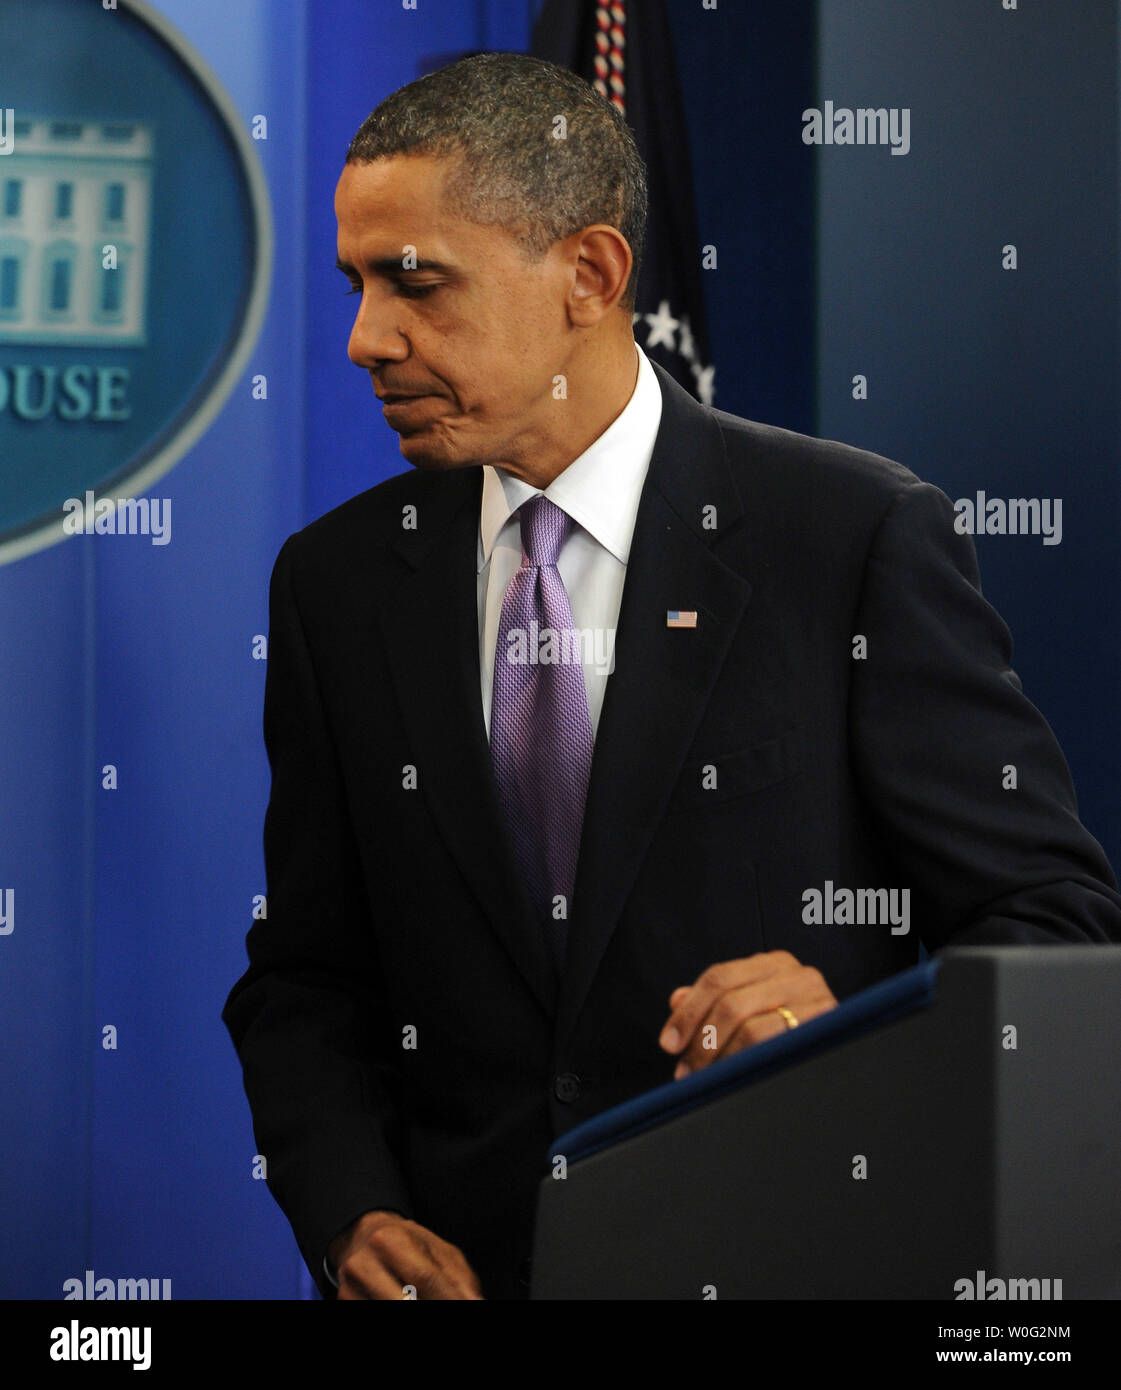 U.S. President Barack Obama departs after making a statement regarding bomb material found on cargo planes in the Brady Press Briefing Room of the White House in Washington on October 29, 2010.       UPI/Roger L. Wollenberg Stock Photo